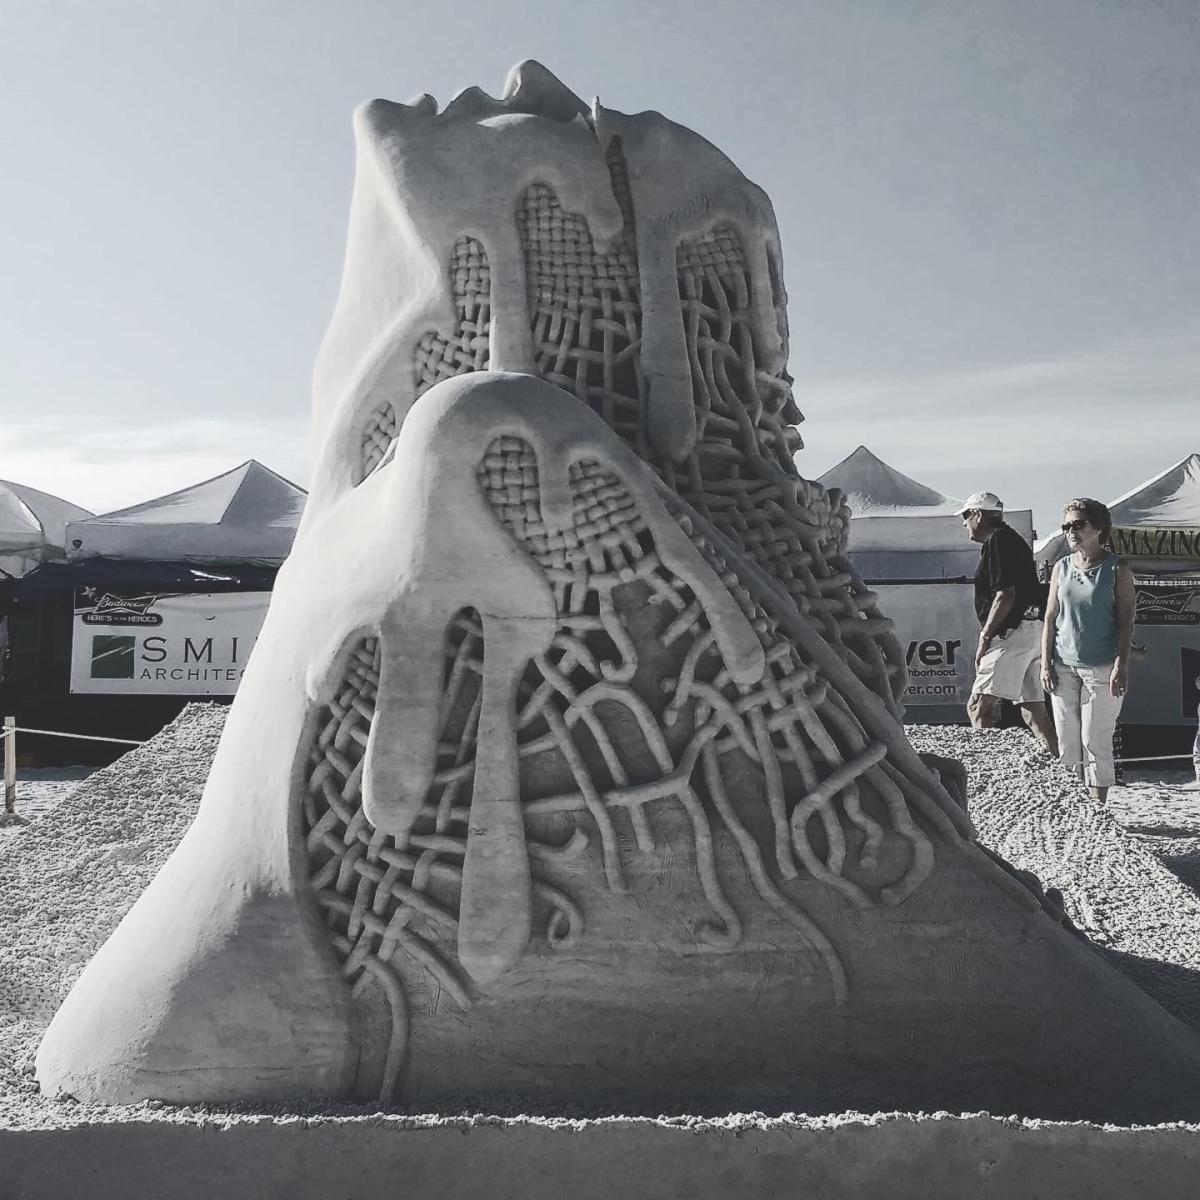 Black and white image of a sand sculpture that depicts an unclear sculpture that is melting. Under the melting is some webbing.